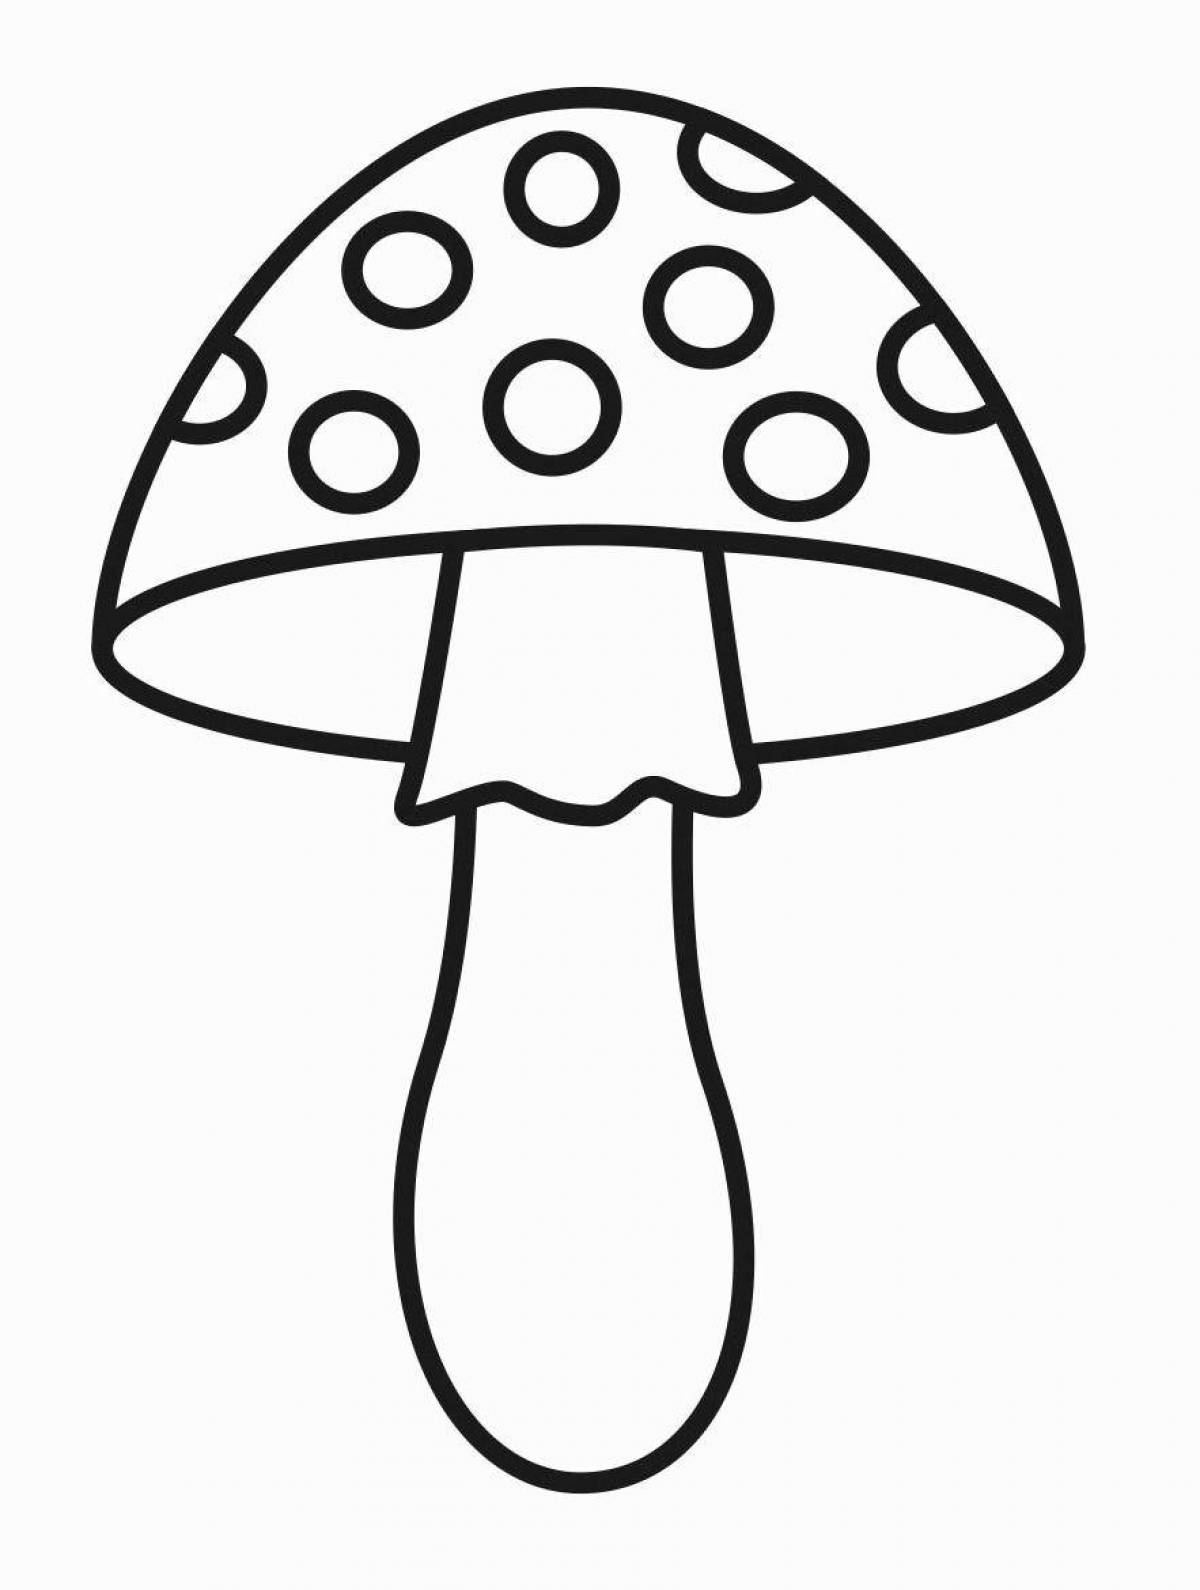 Mushroom fun coloring book for 3-4 year olds